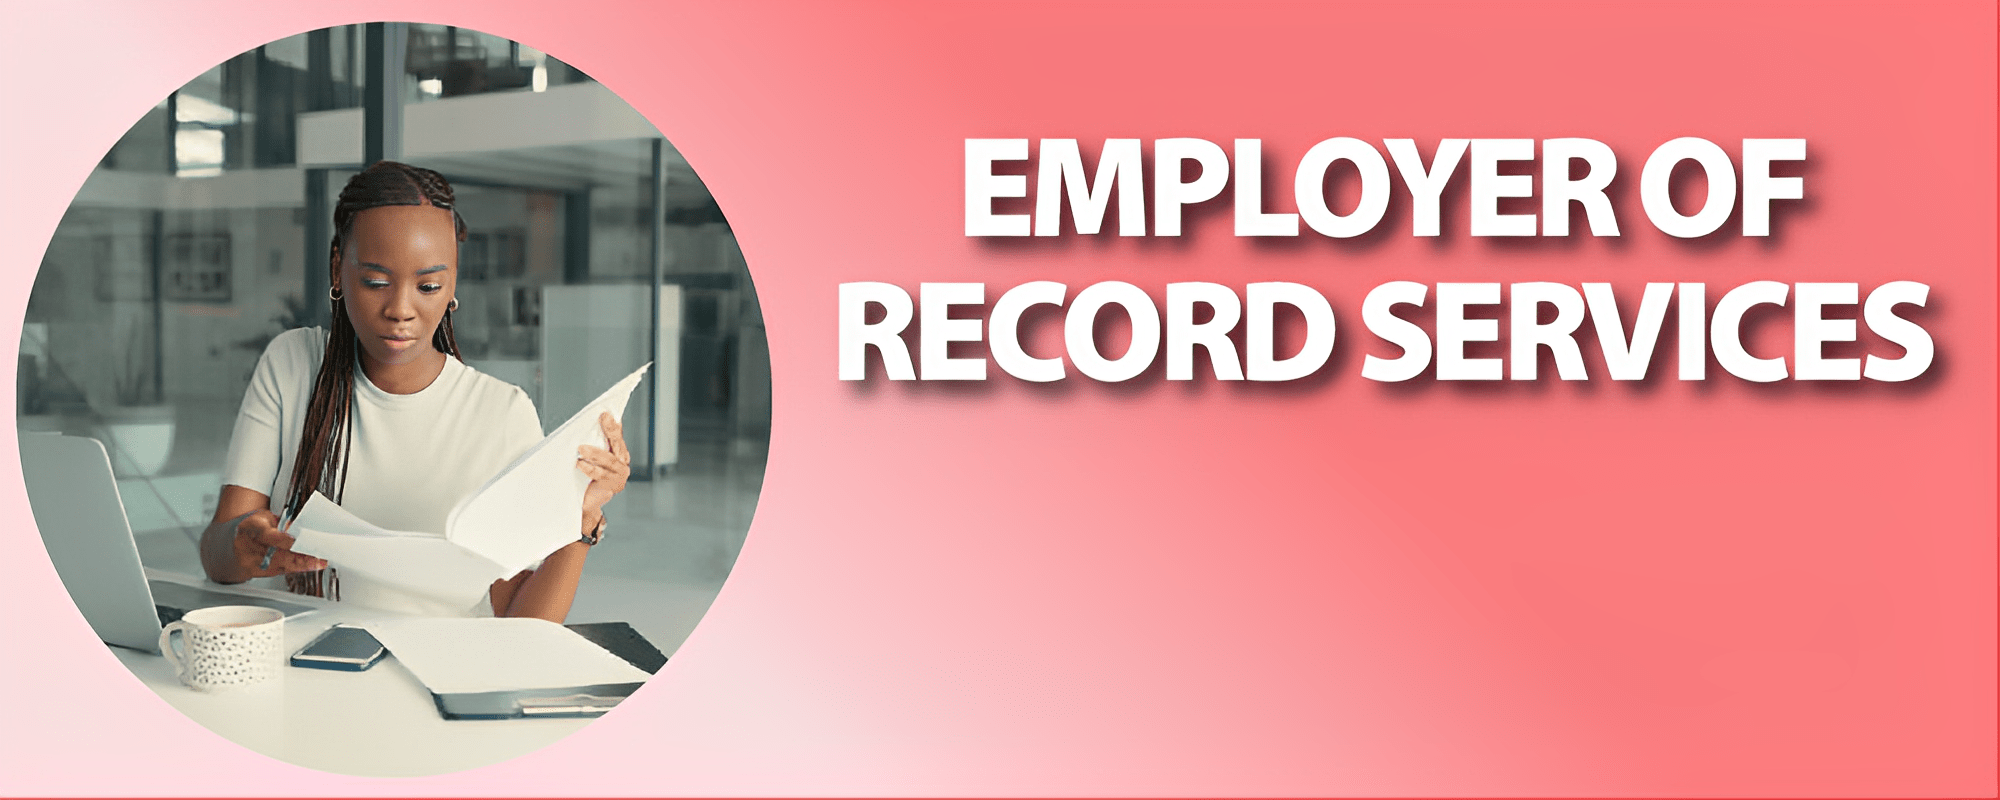 DRC Employer of Record - Employer of Record Services in DRC